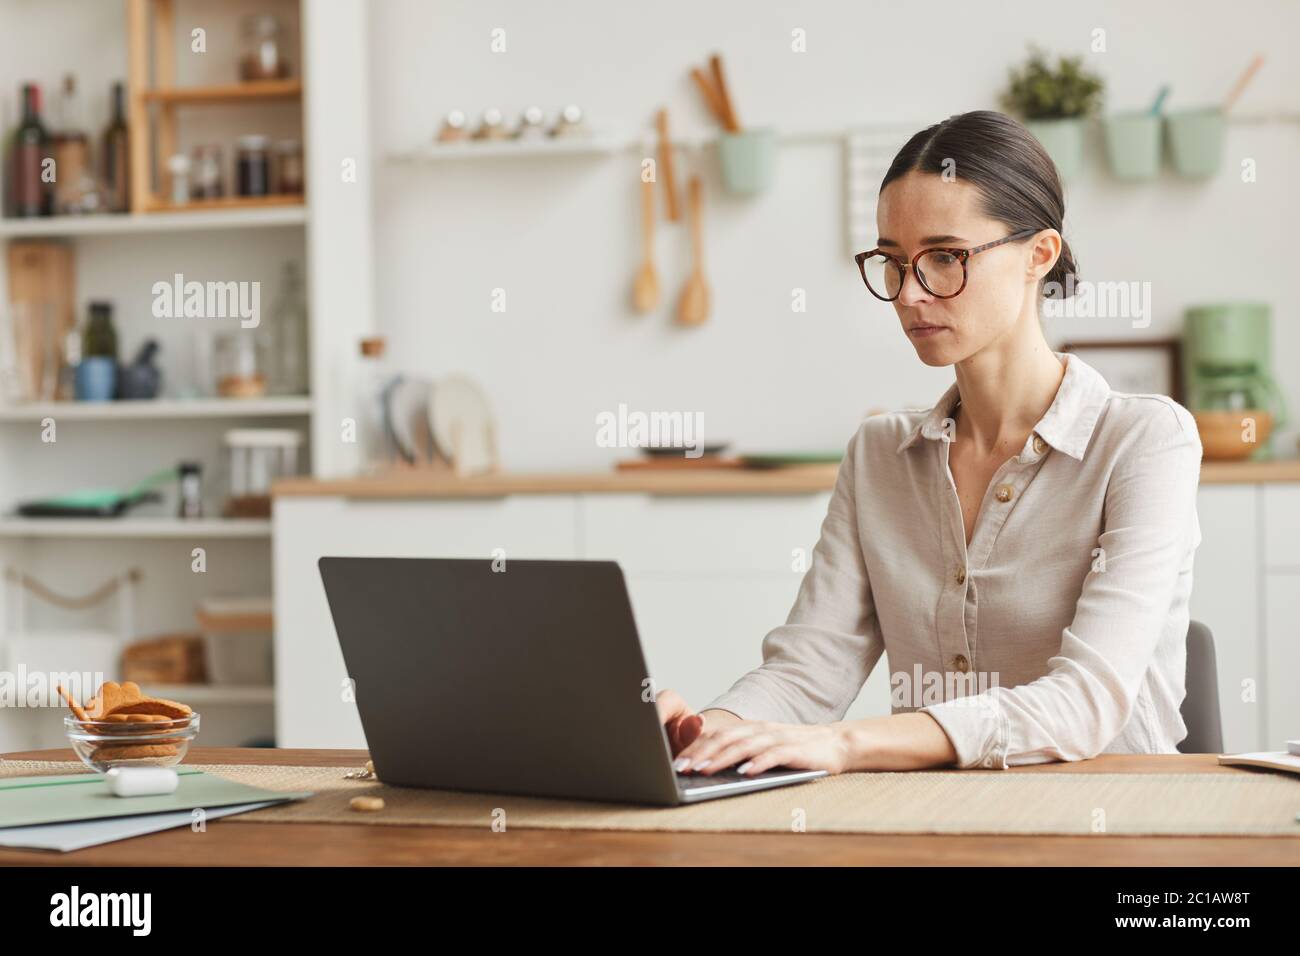 Portrait of elegant businesswoman wearing glasses while using laptop at cozy home office workplace, copy space Stock Photo